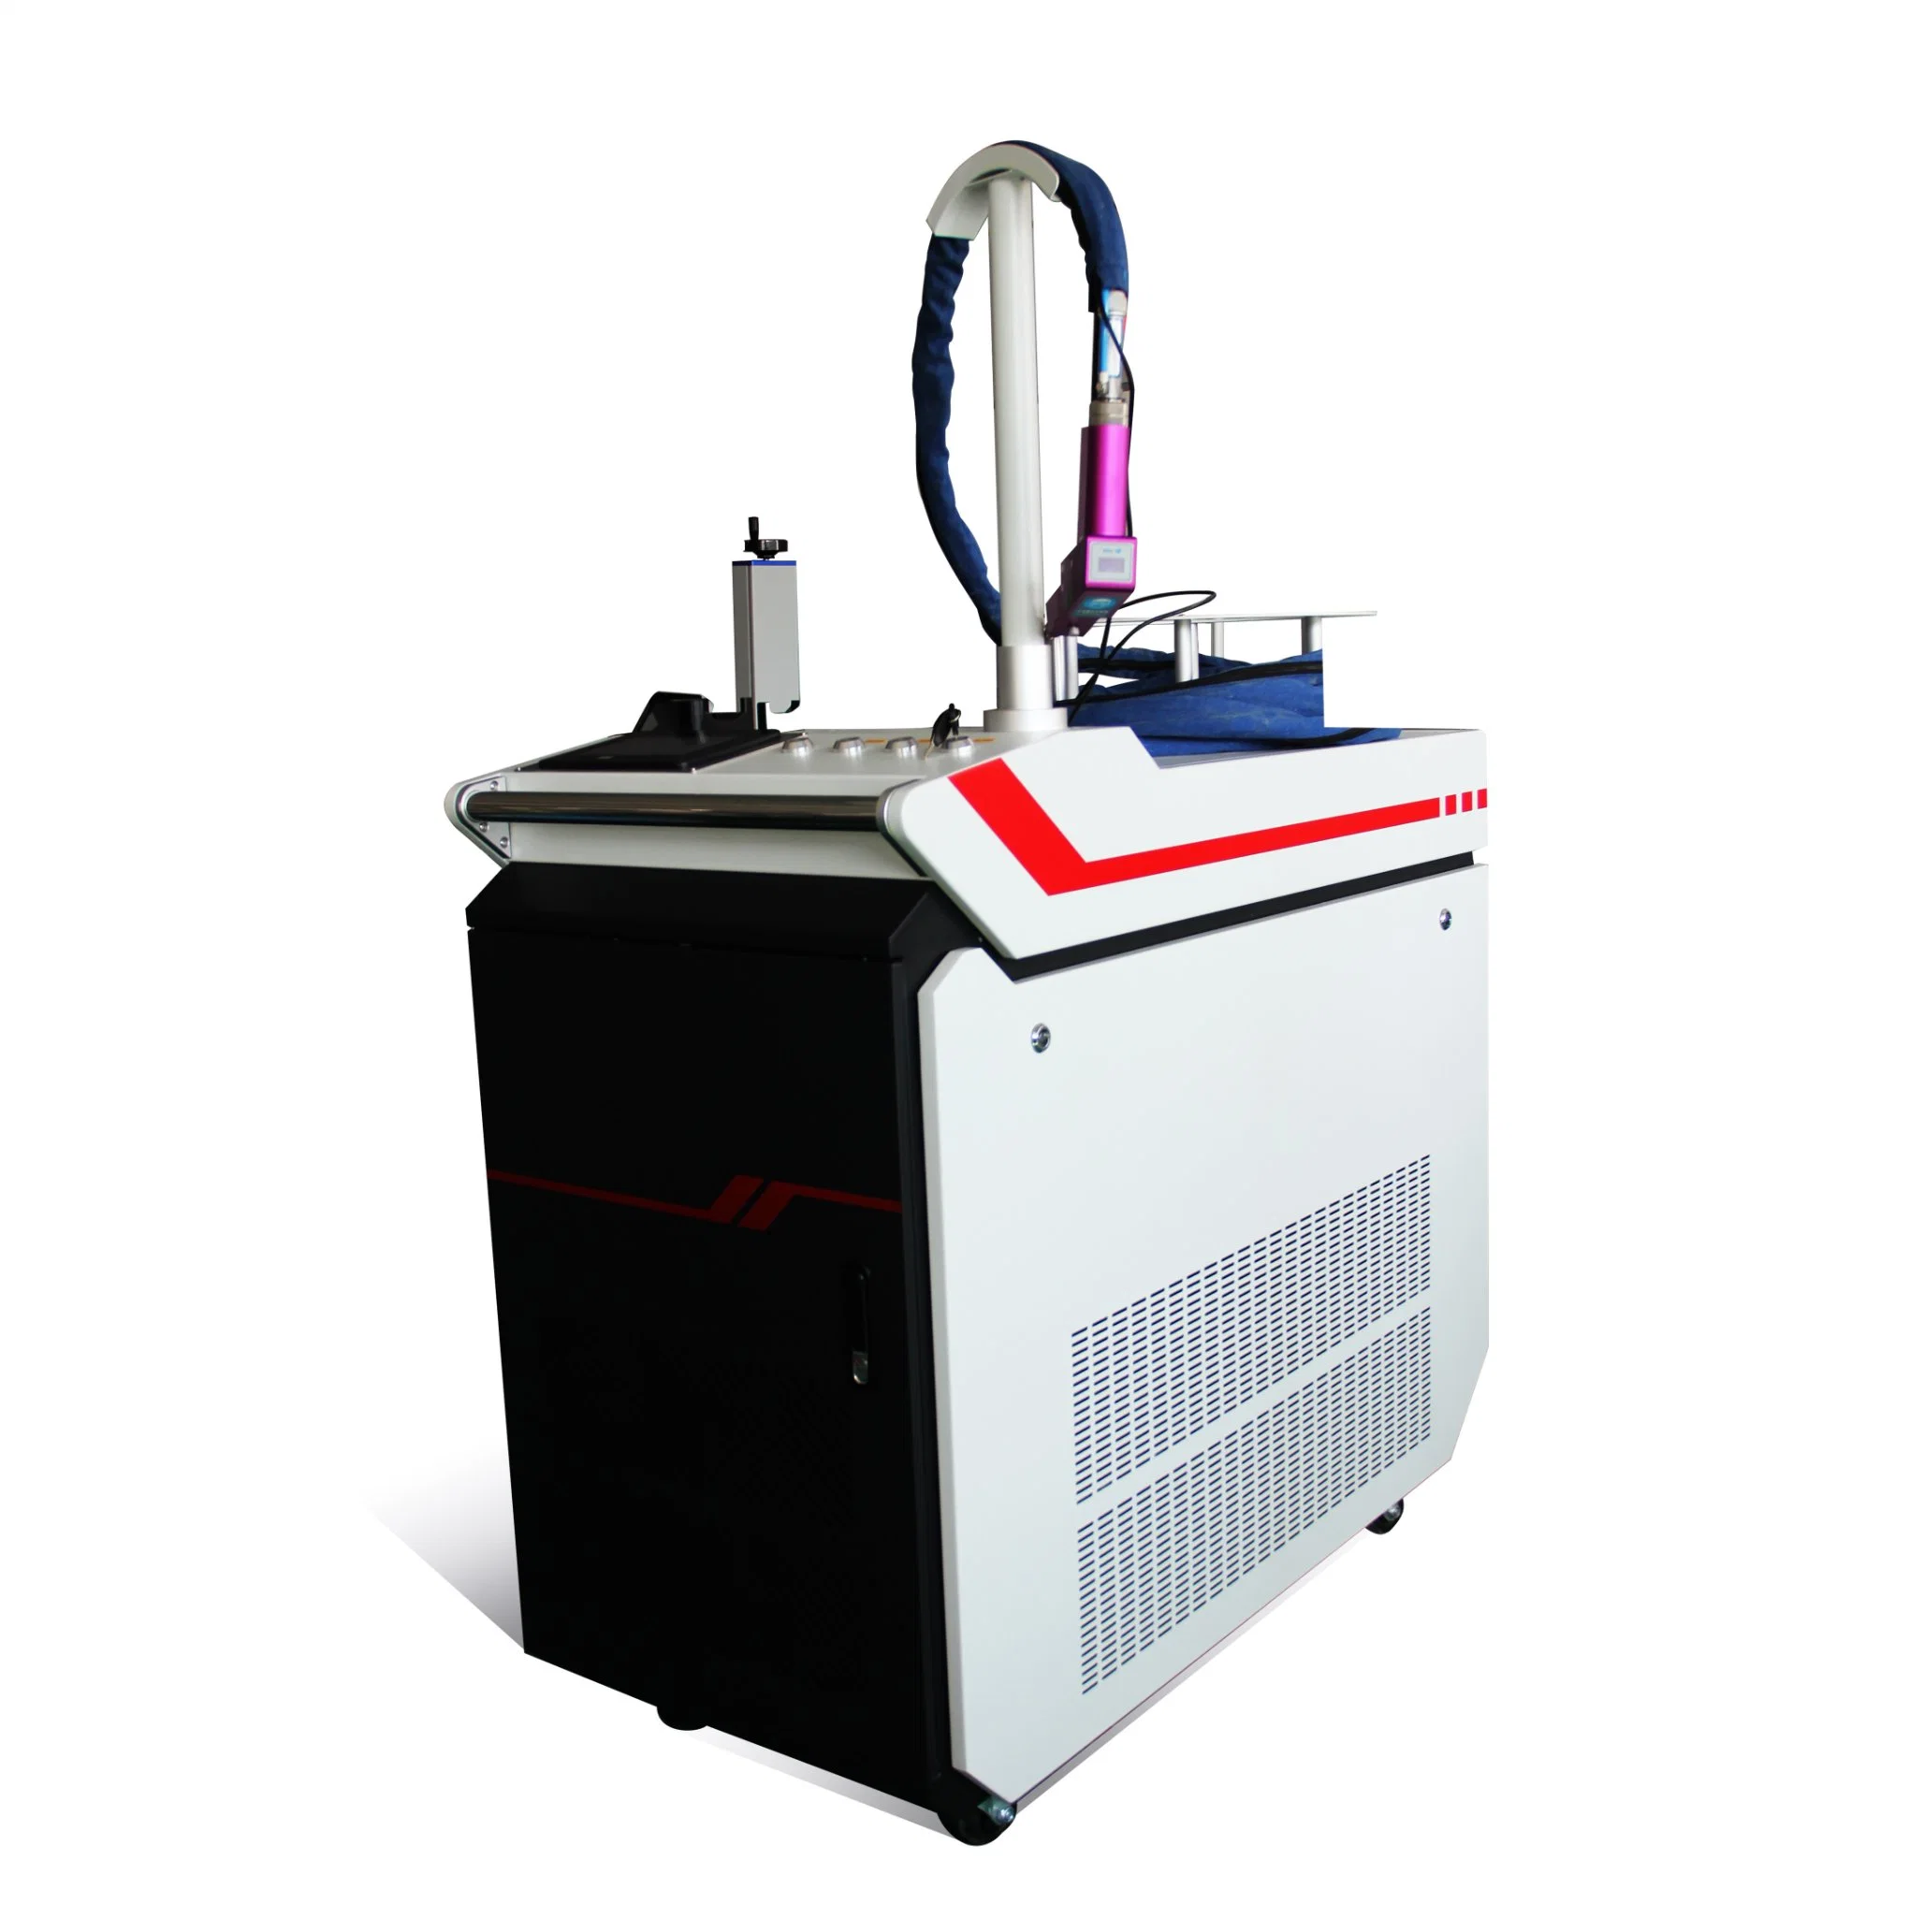 1000W Professional Fiber Laser Welding System with Certificate